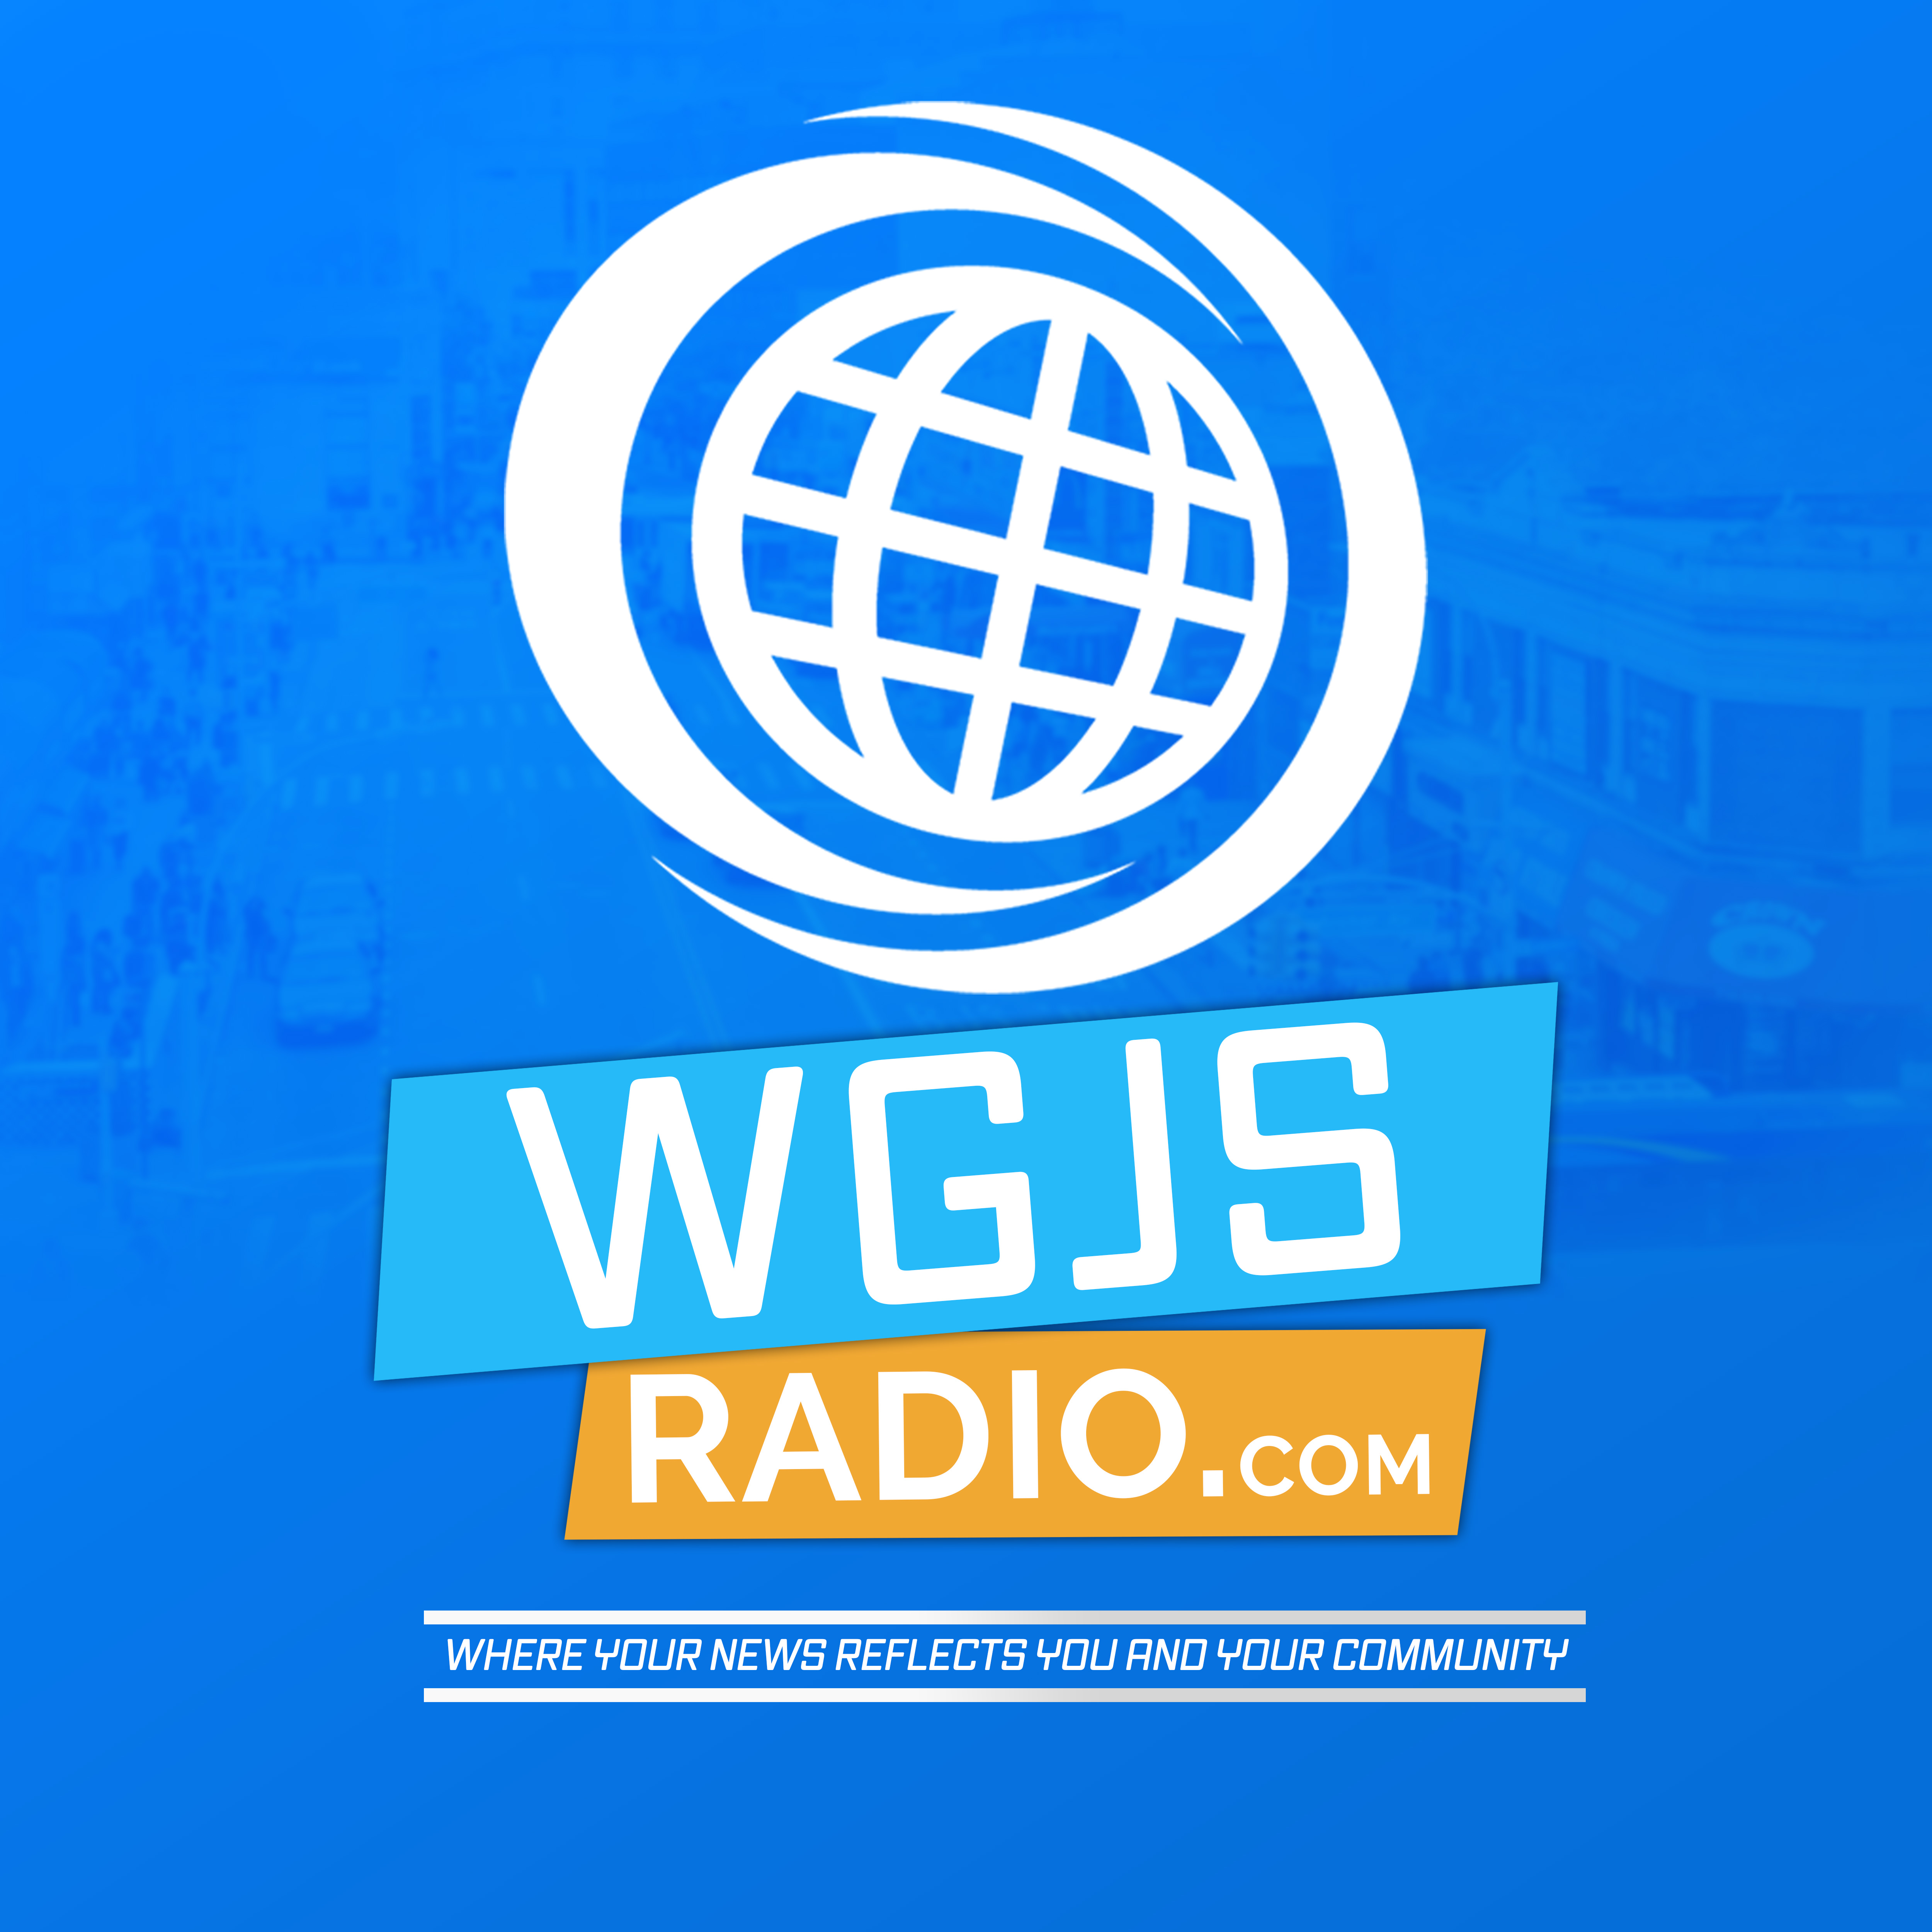 Art for Your listening to WGJS RAdio.com by Station ID